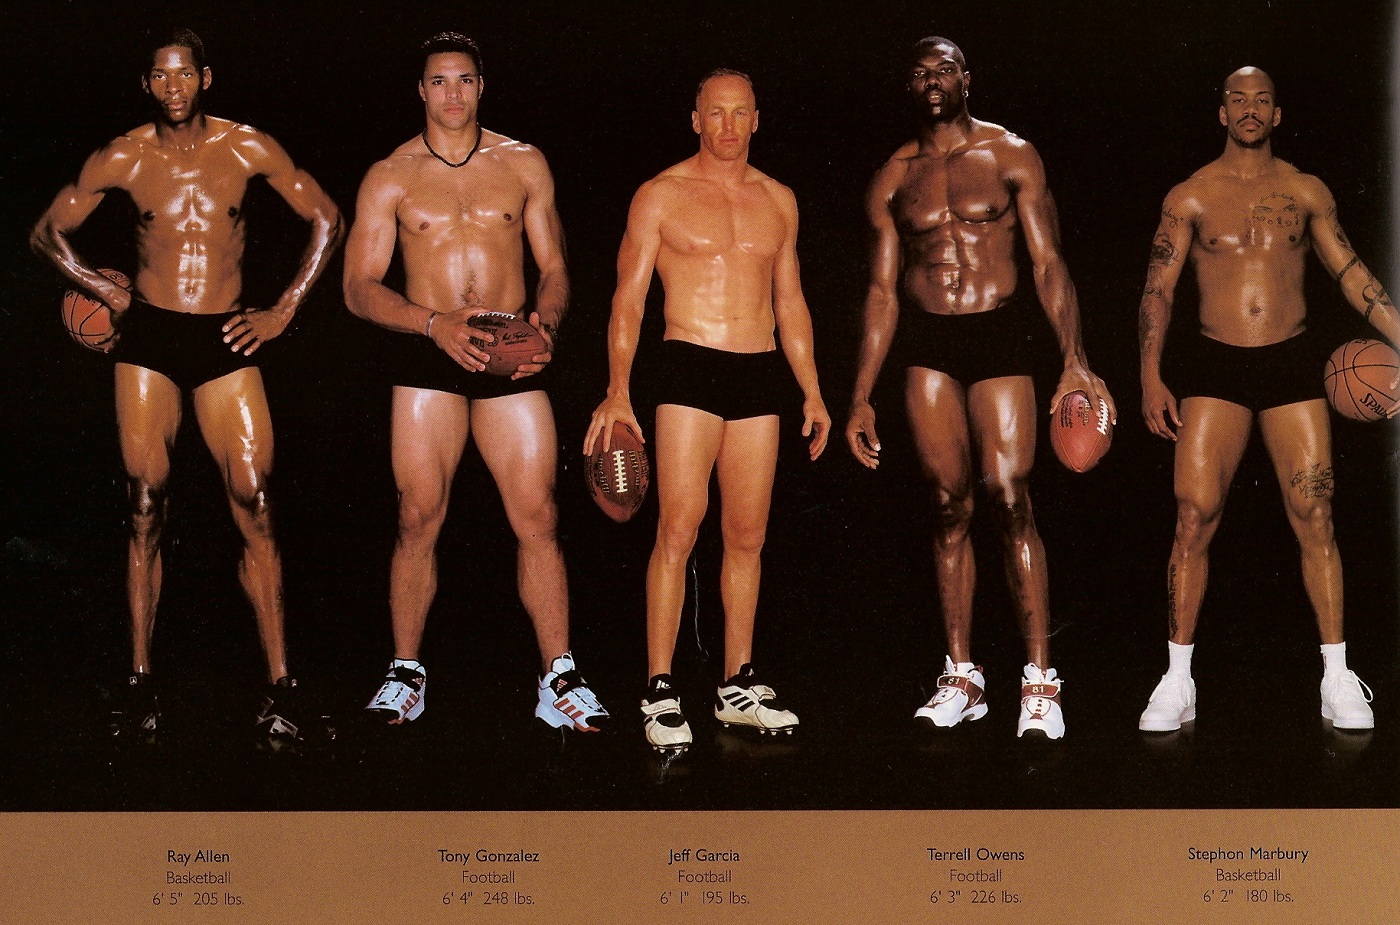 Half Naked and Oily Athletes